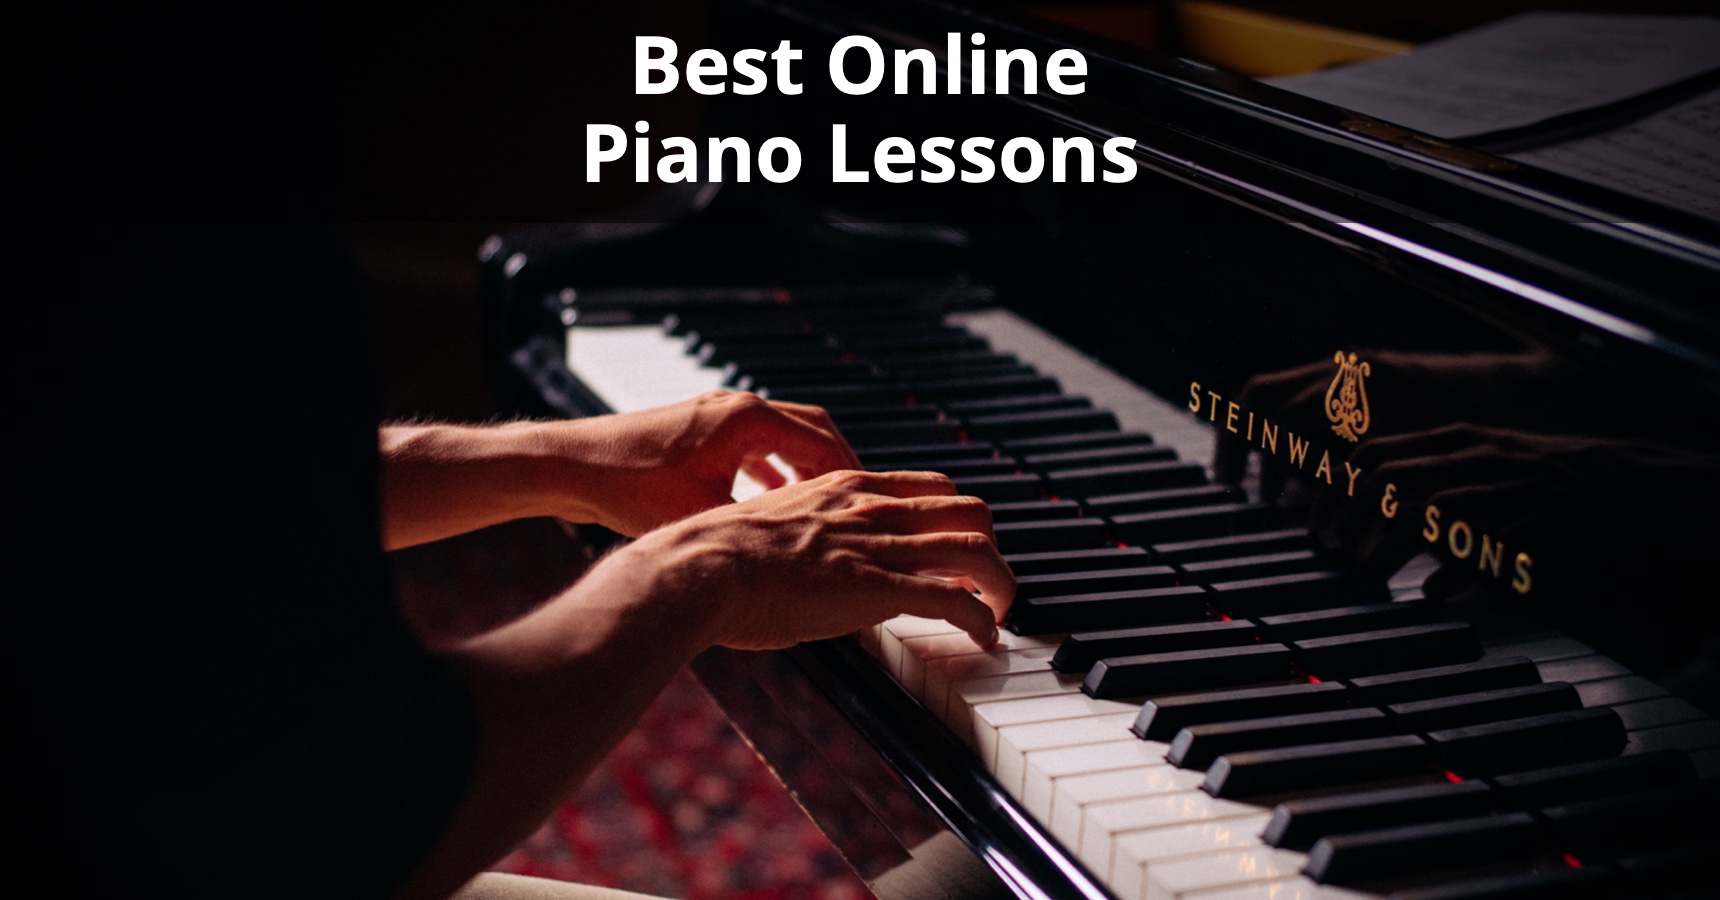 14 Best Online Piano Lessons In 2022 & Ranked)